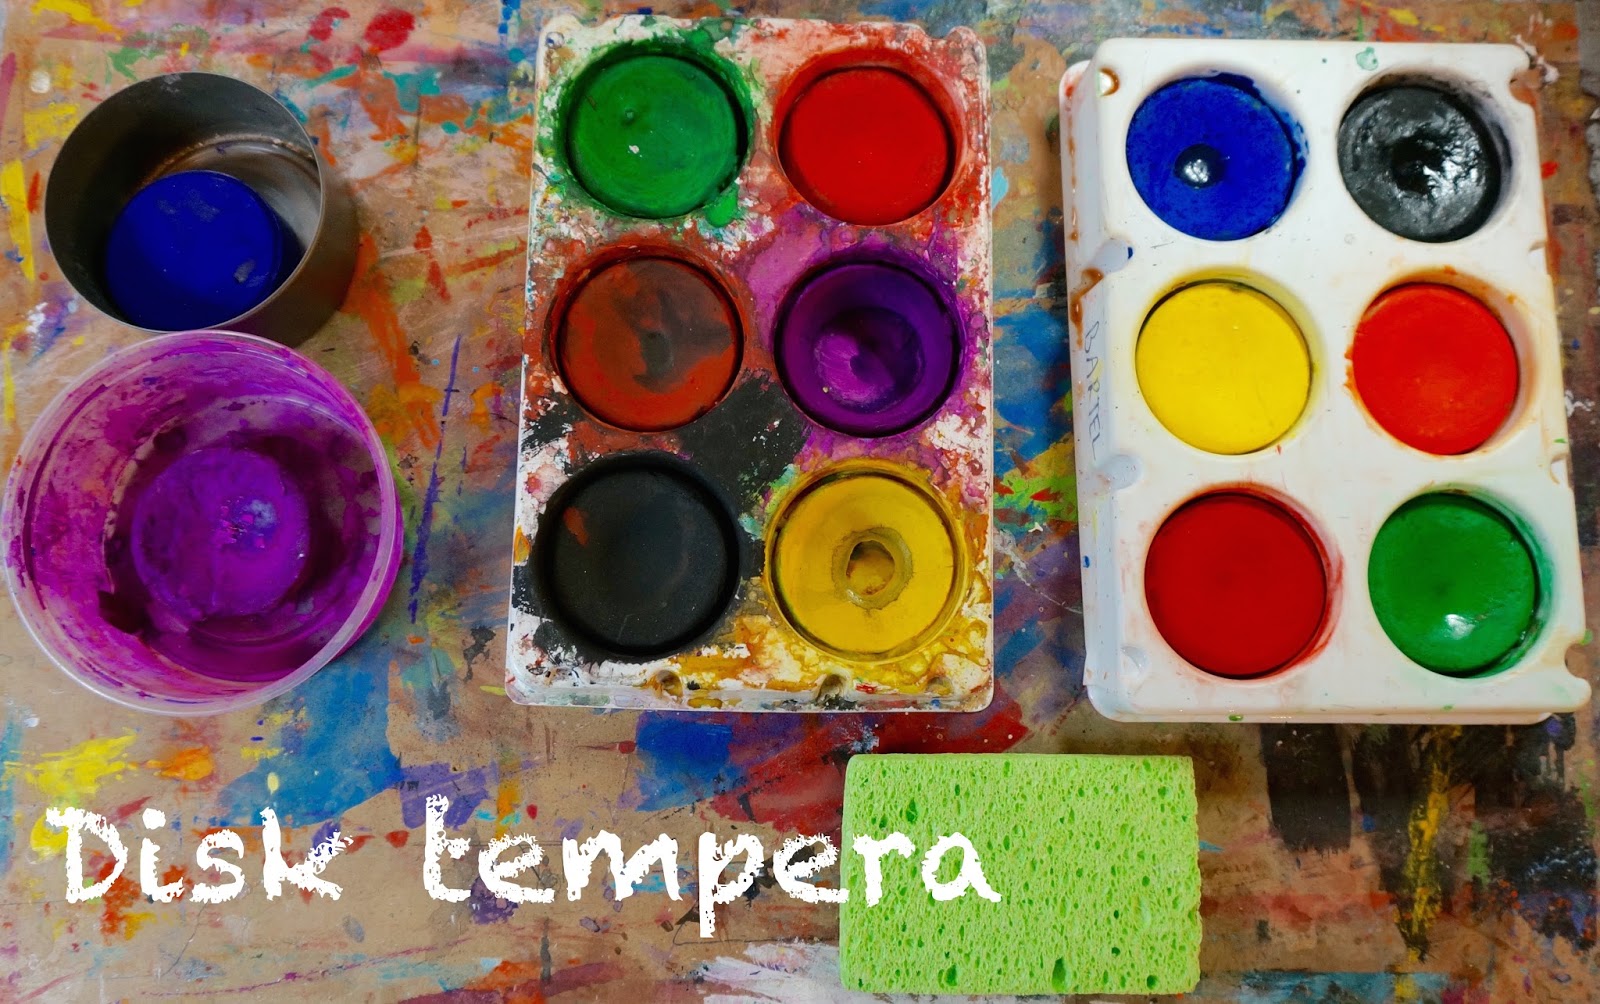 How to clean and refill a DIRTY watercolor pallet 